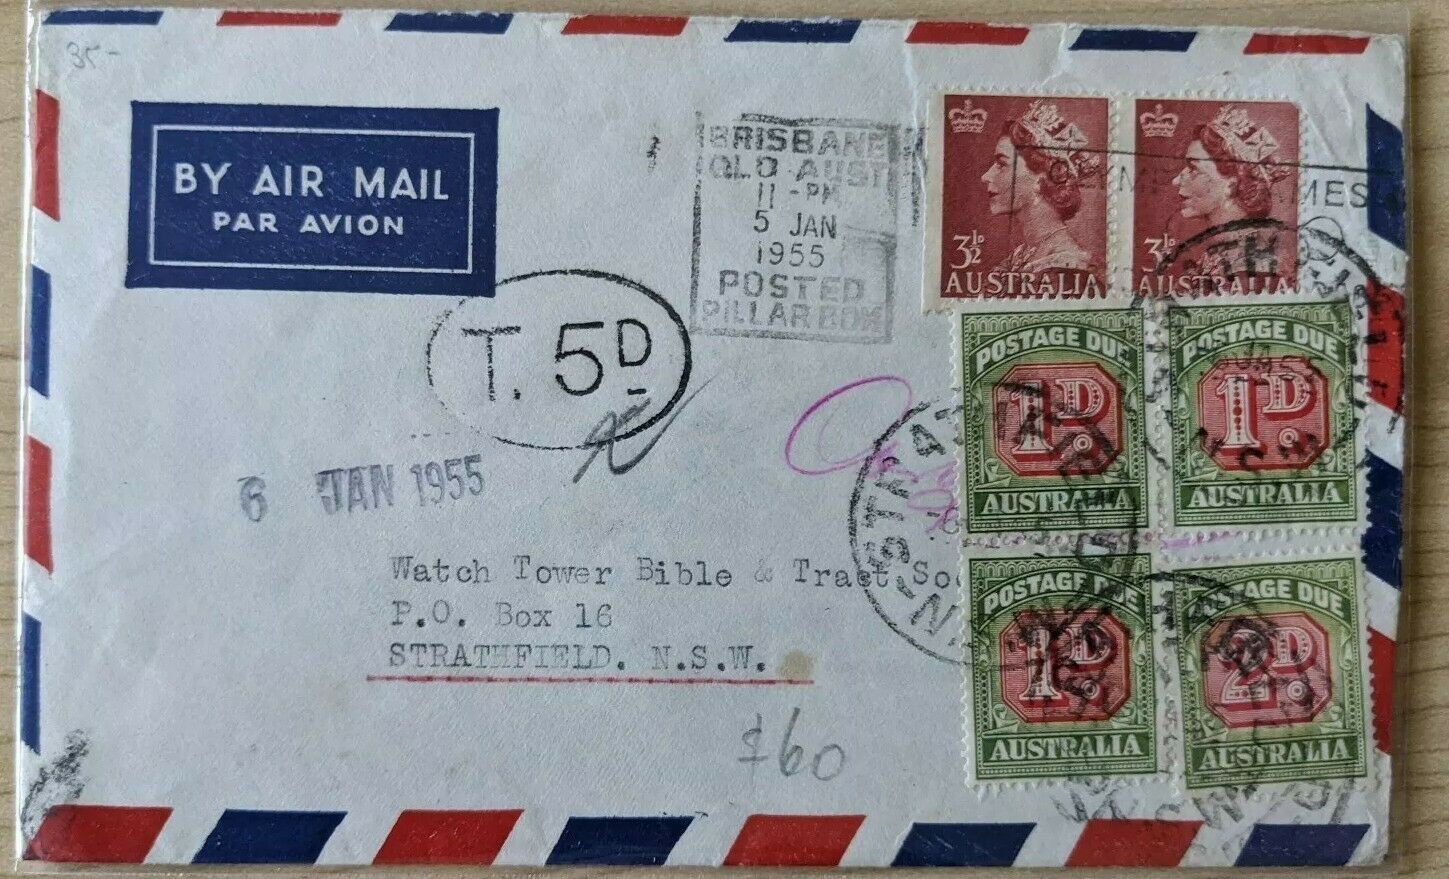 Australia 7d Air Mail Brisbane - Strathfield NSW with 4 Postage Dues added (5d)